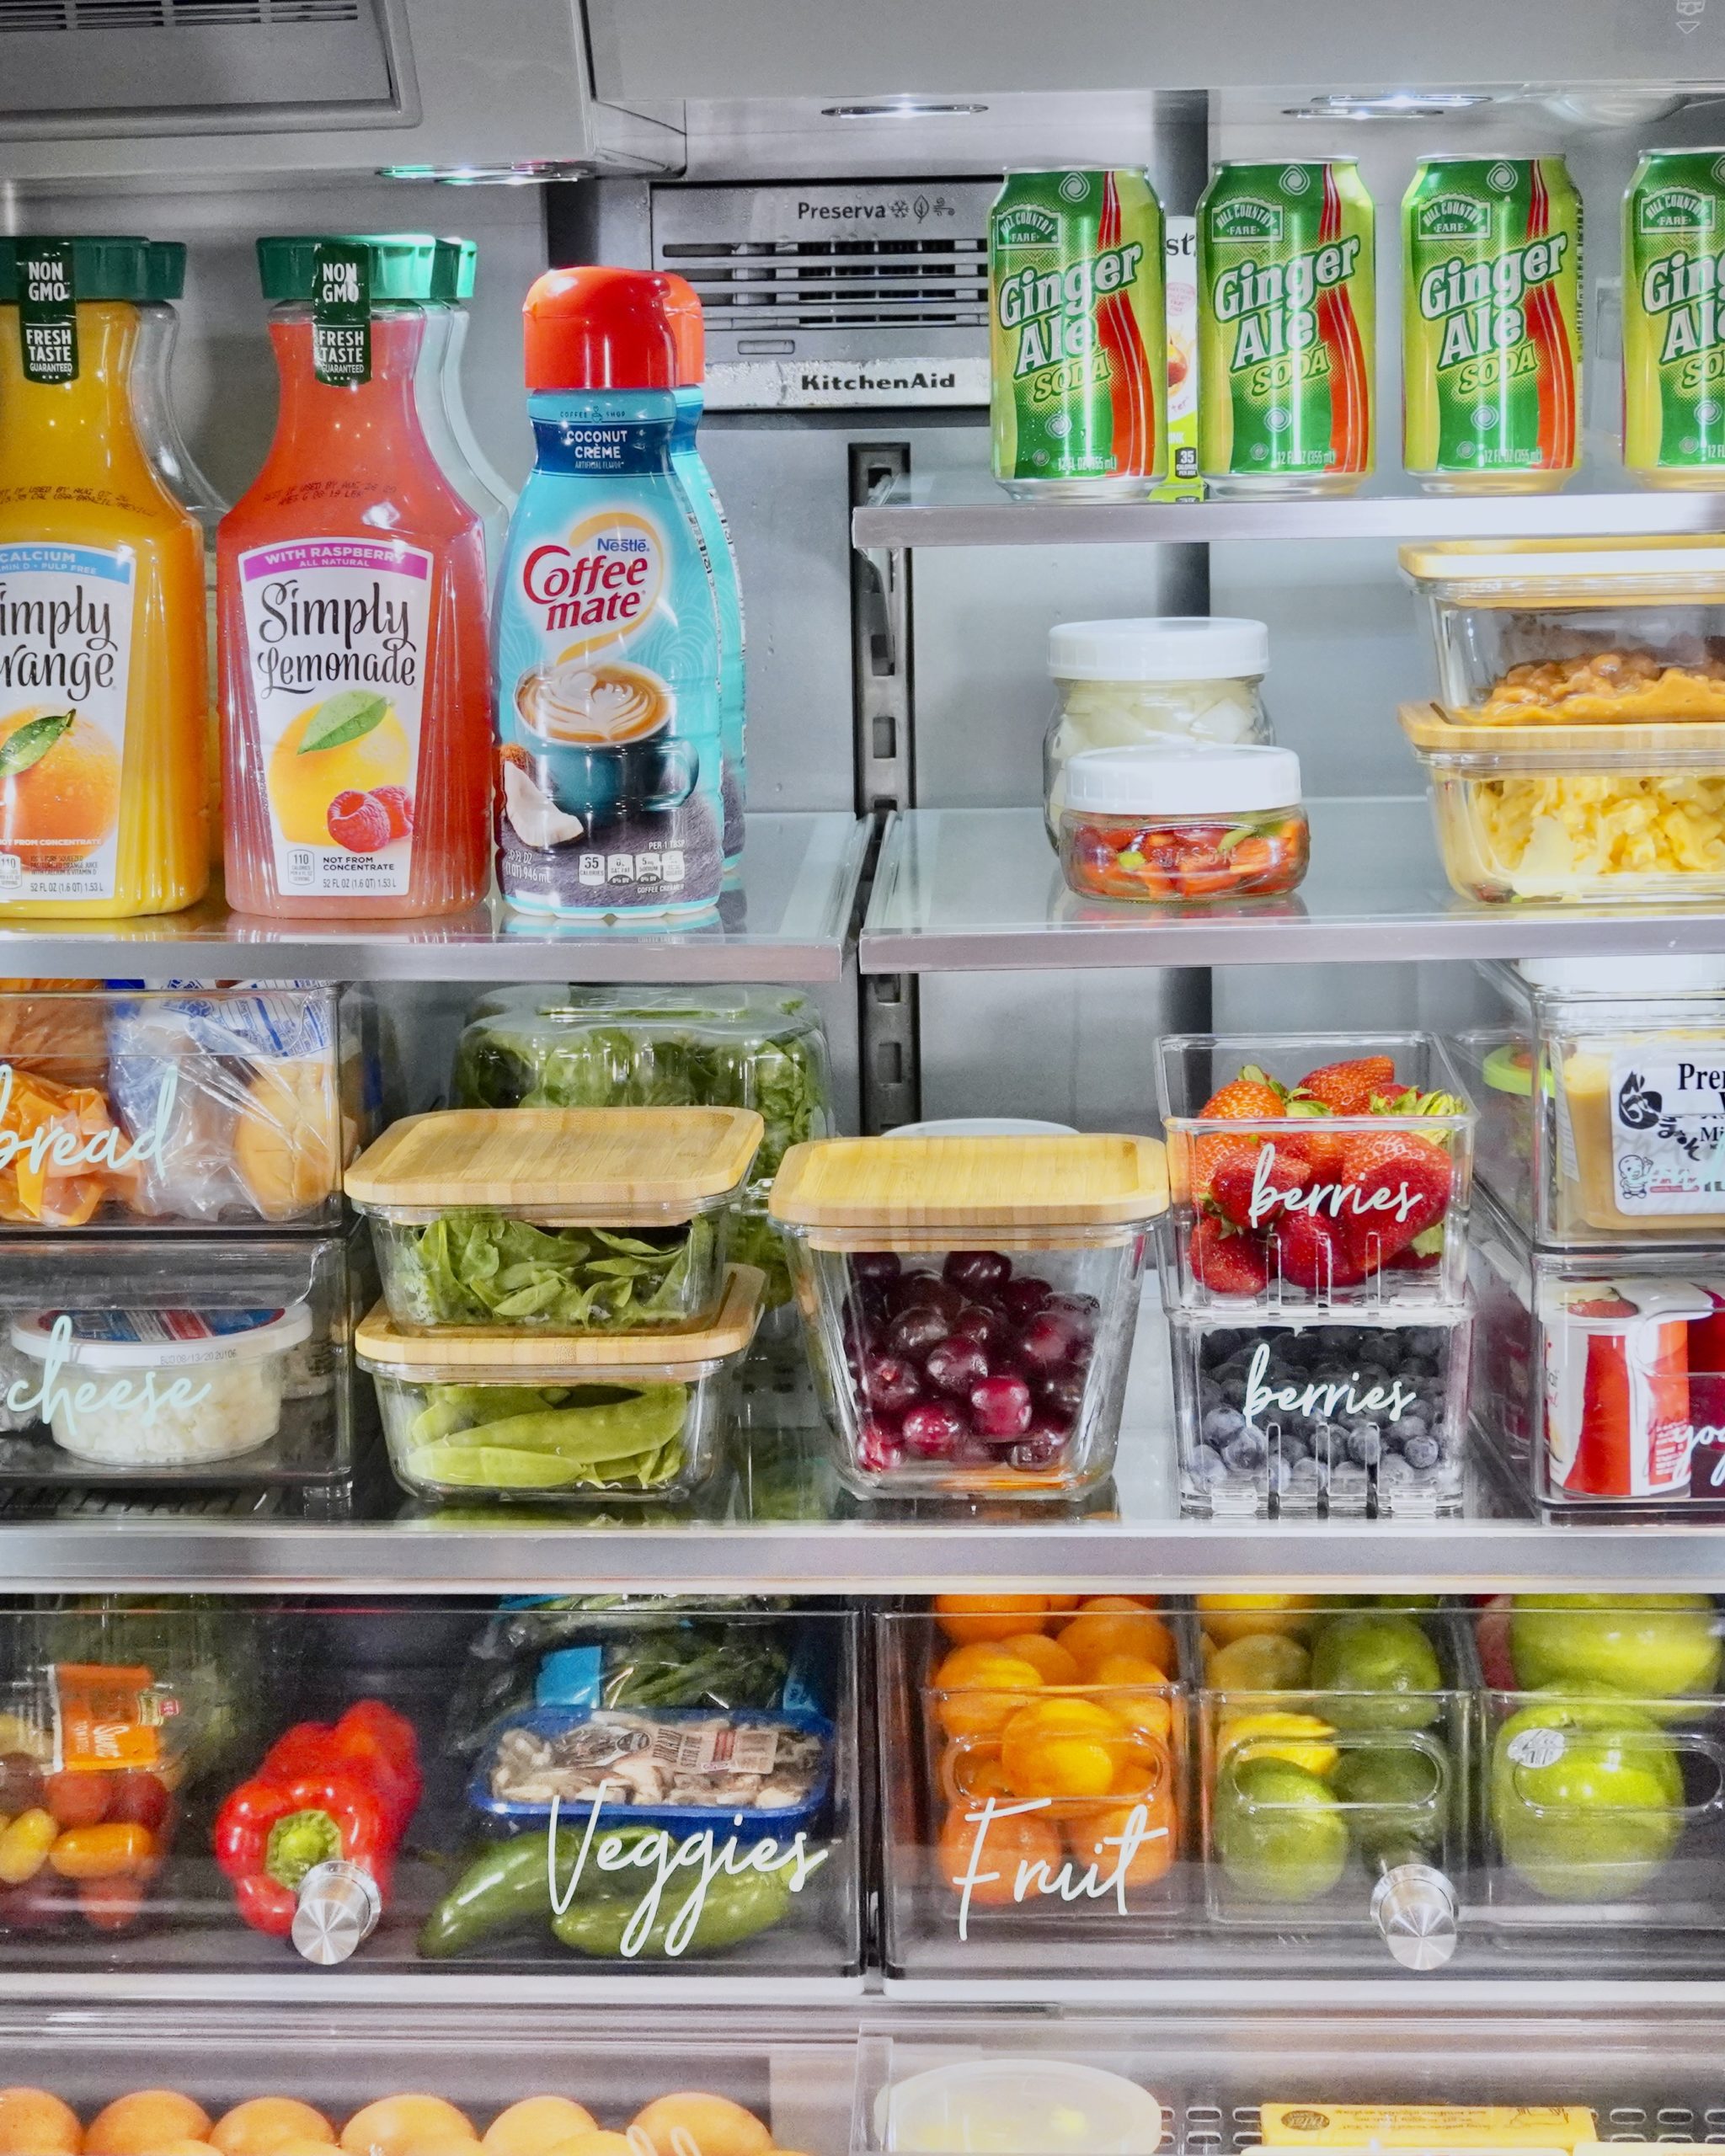 How to Clean & Organize Your Refrigerator or Freezer